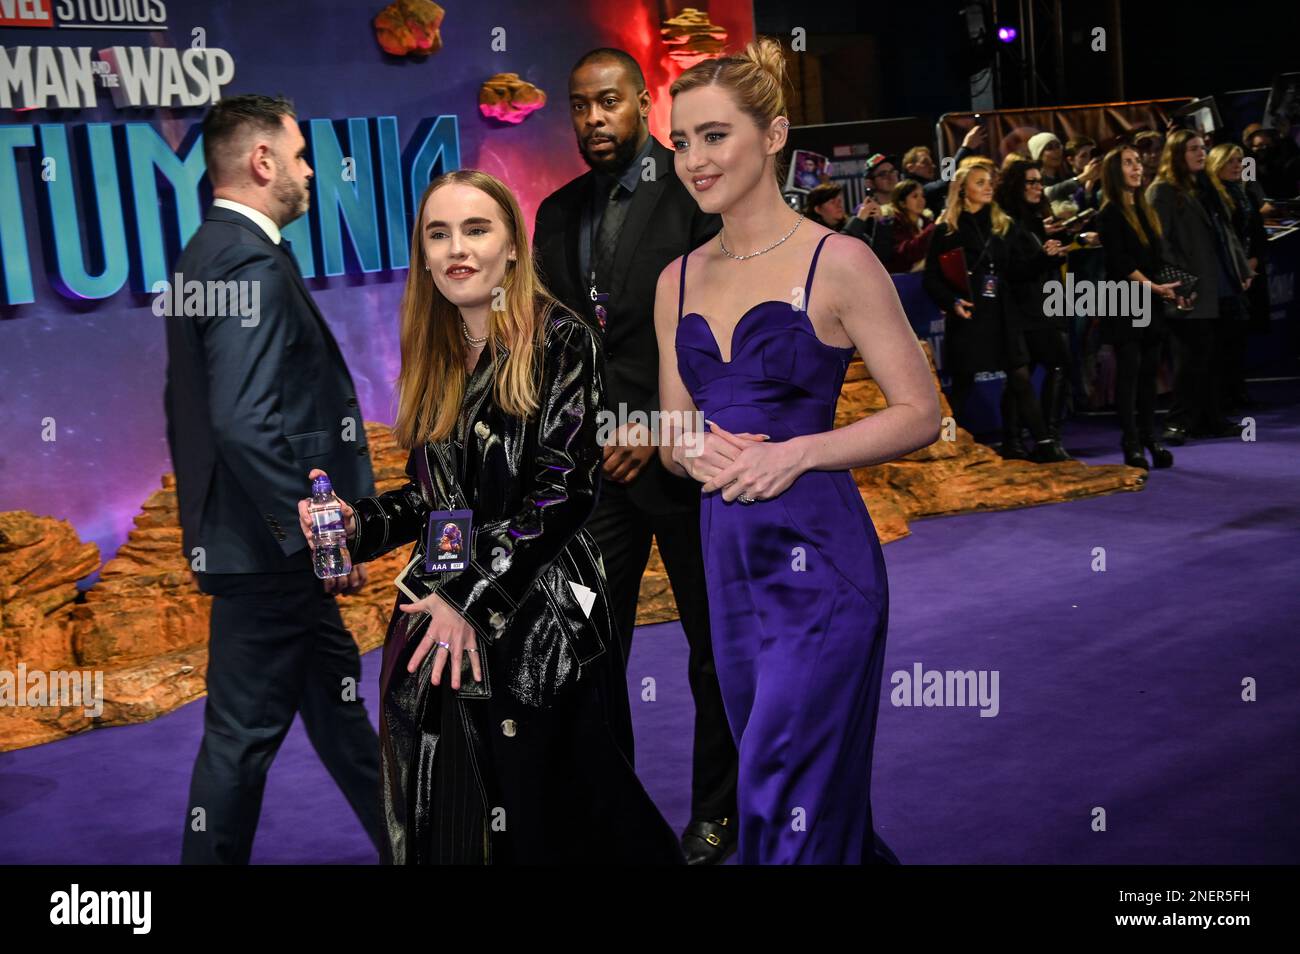 London, UK. 16th February 2023. Kathryn Newton attends UK Gala Screening of Ant-Man and The Wasp: Quantumania, at BFI IMAX, Waterloo, London, UK. Photo date: 16th February 2023. Stock Photo